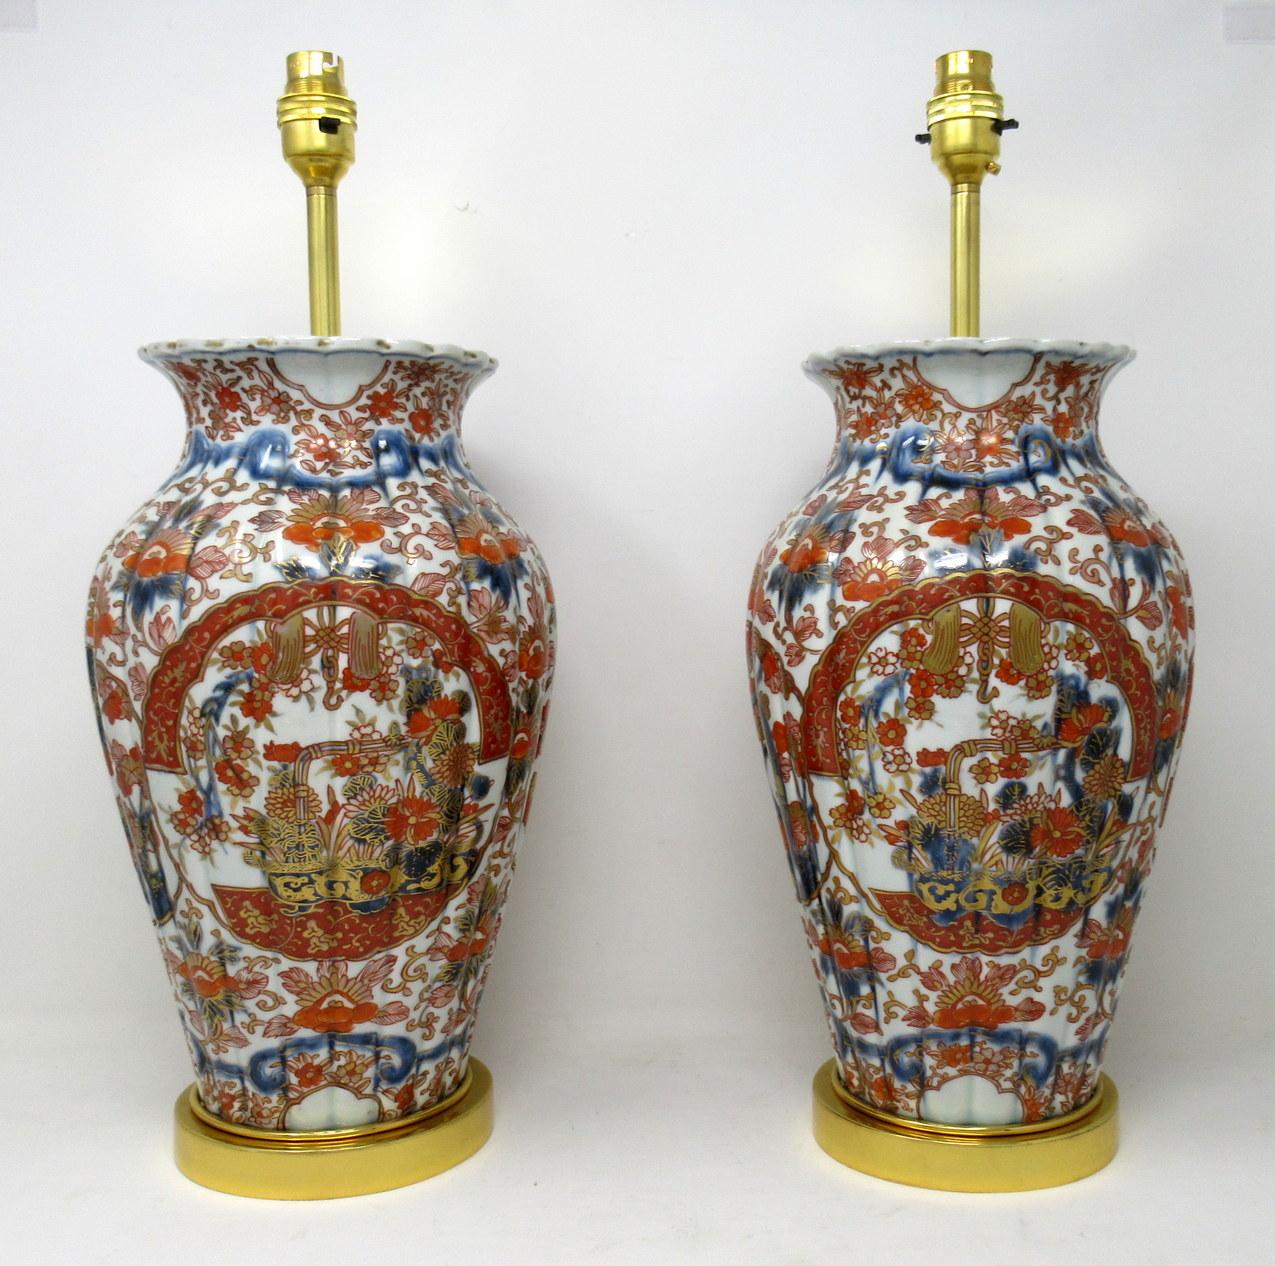 Stunning pair traditional Japanese Imari bulbous form Porcelain vases of generous proportions, now converted to a pair of electric Table Lamps, complete with ormolu stepped circular bases and later ormolu mounts. First half of the Nineteenth